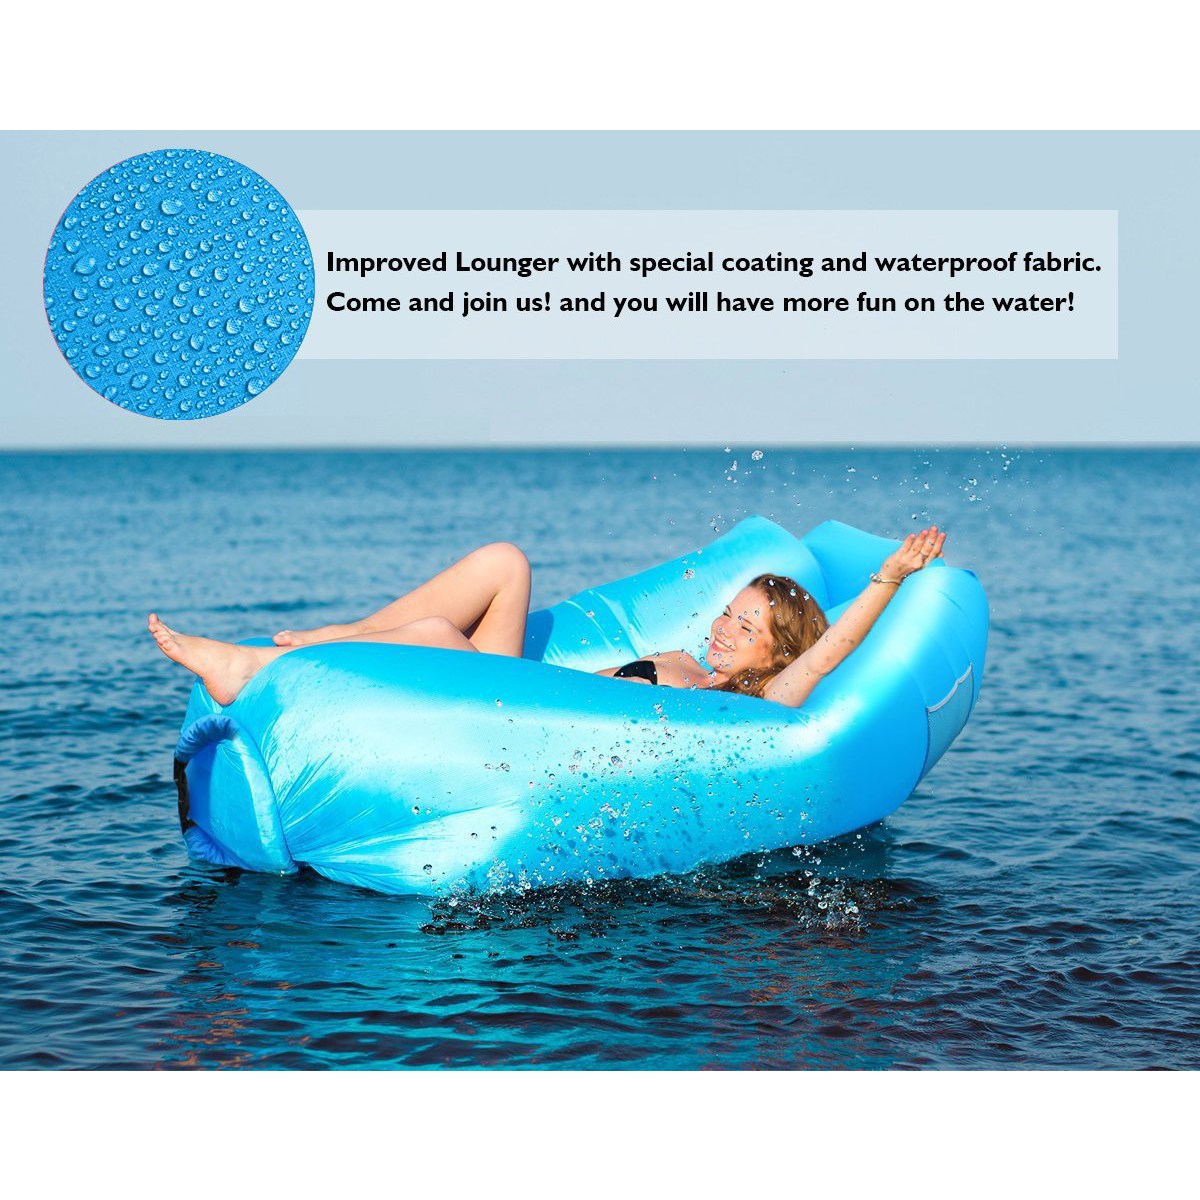 Sofa Hammock with Storage Waterproof for Beach Pool Travelling Camping Hiking Party Park Picnic Backyard Parties,Yellow Ydq Inflatable Lounger Mattress Portable Air Couch Banana Chair 